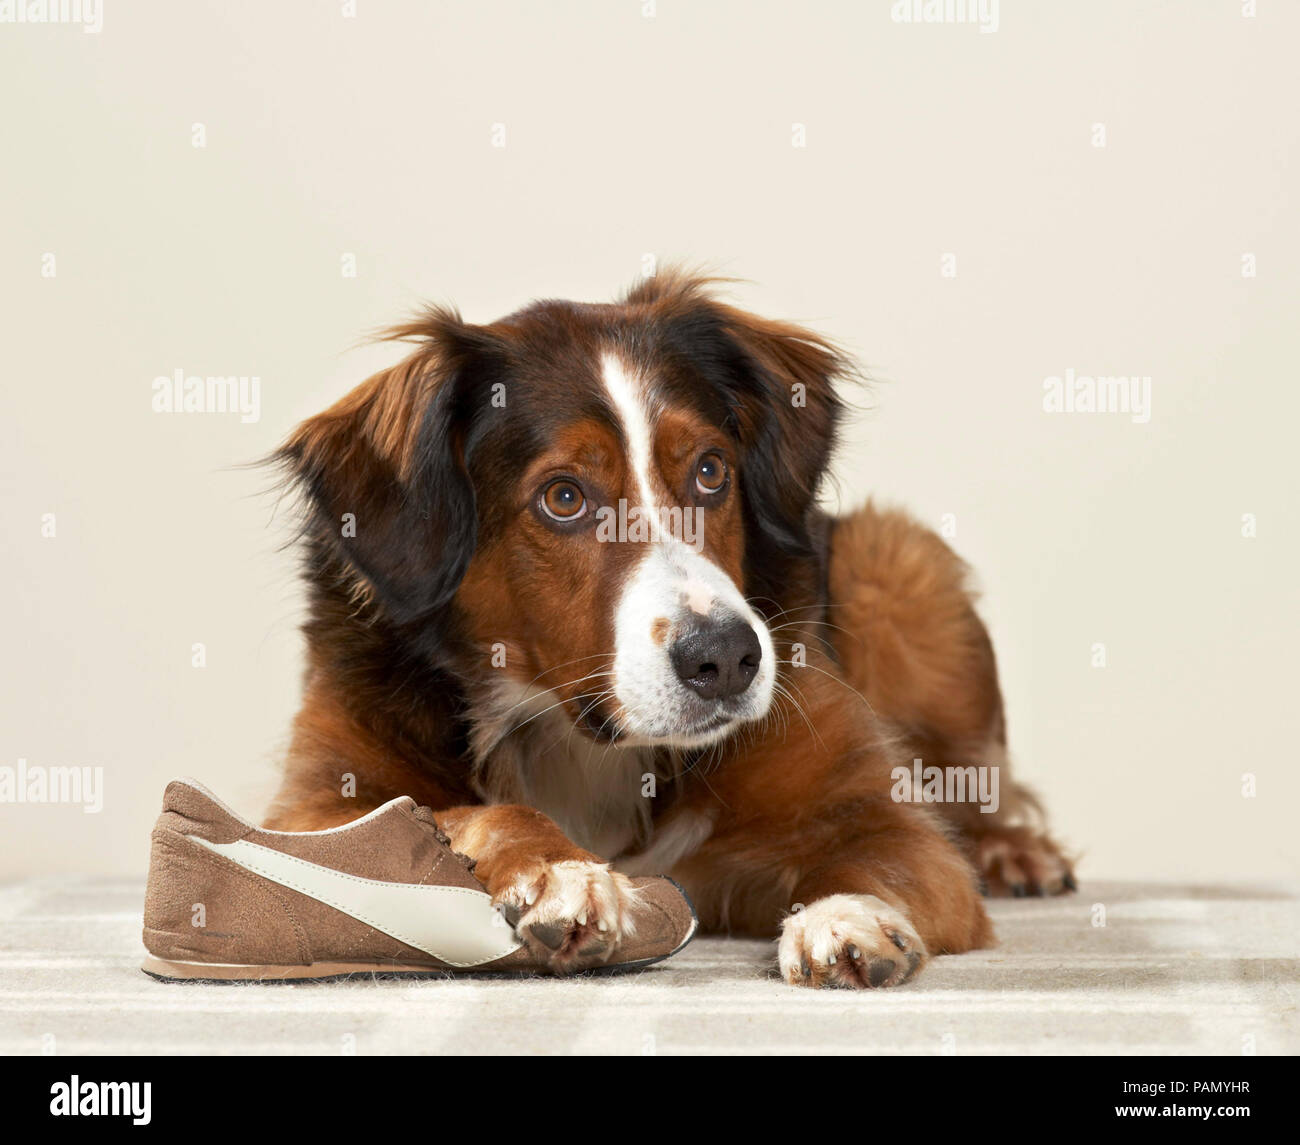 Mixed-breed dog with stolen shoe. Germany. Stock Photo